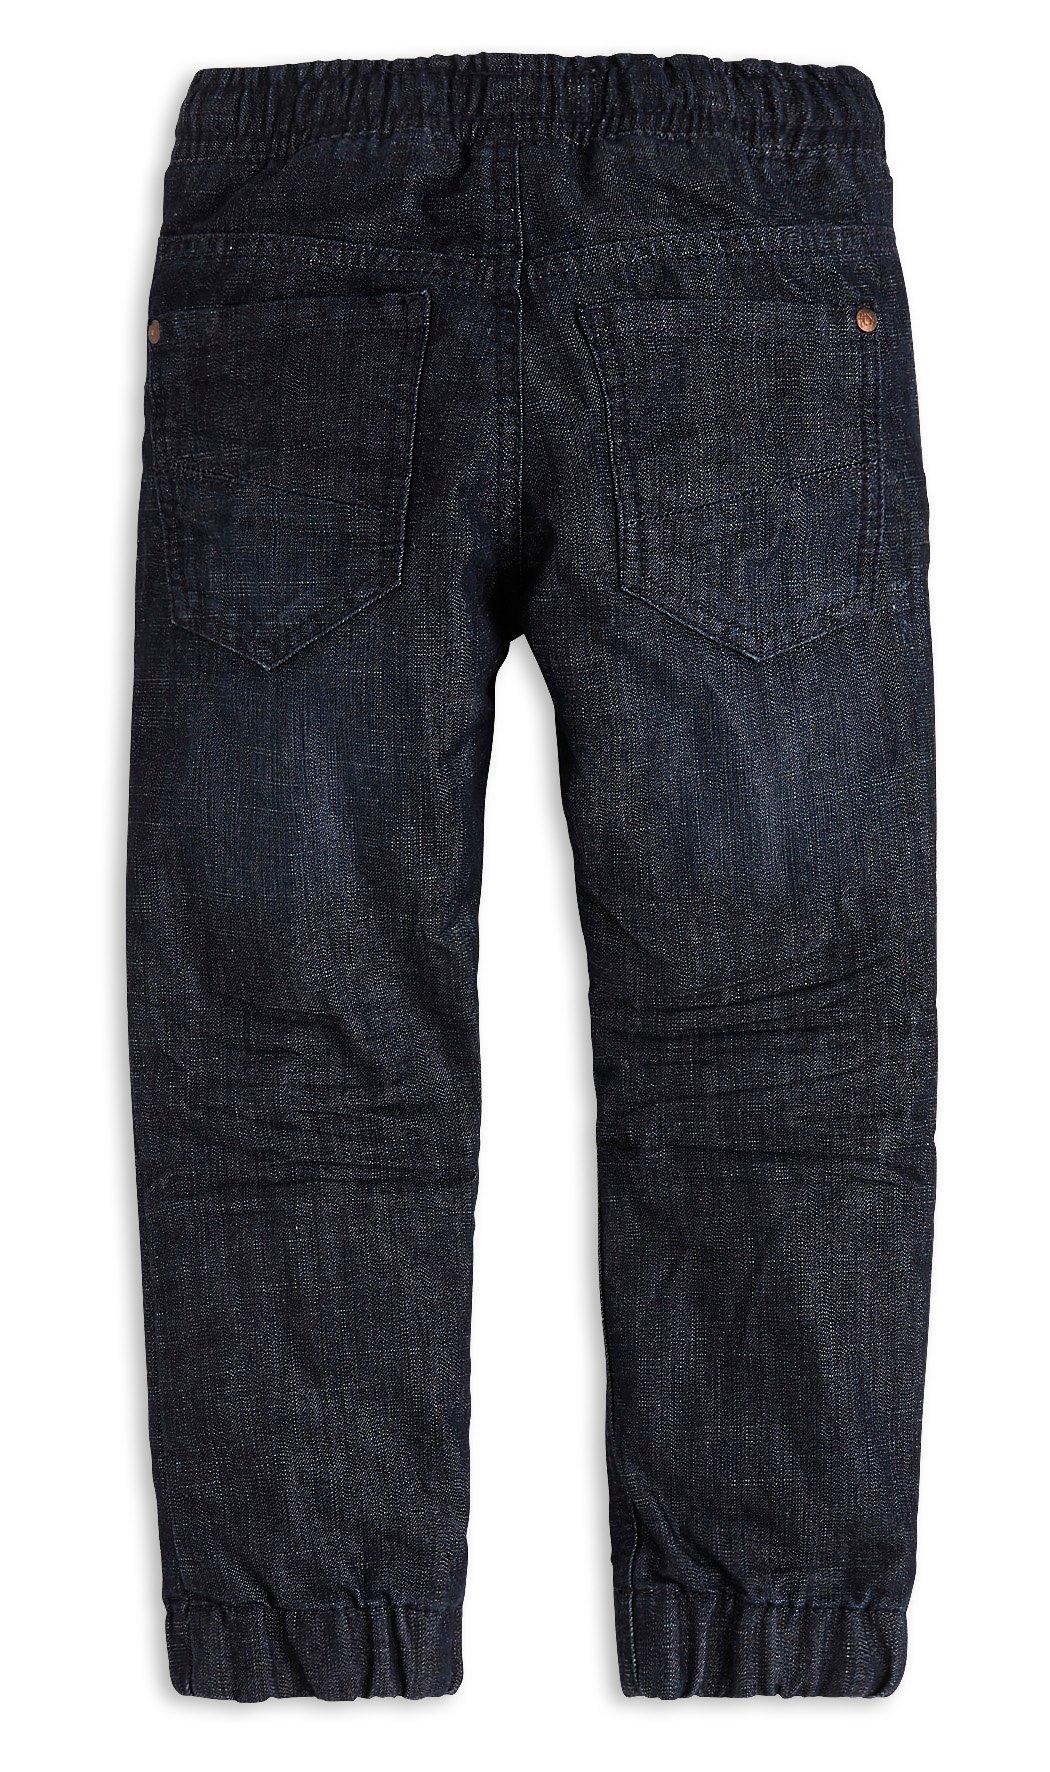 jeans with knee patches